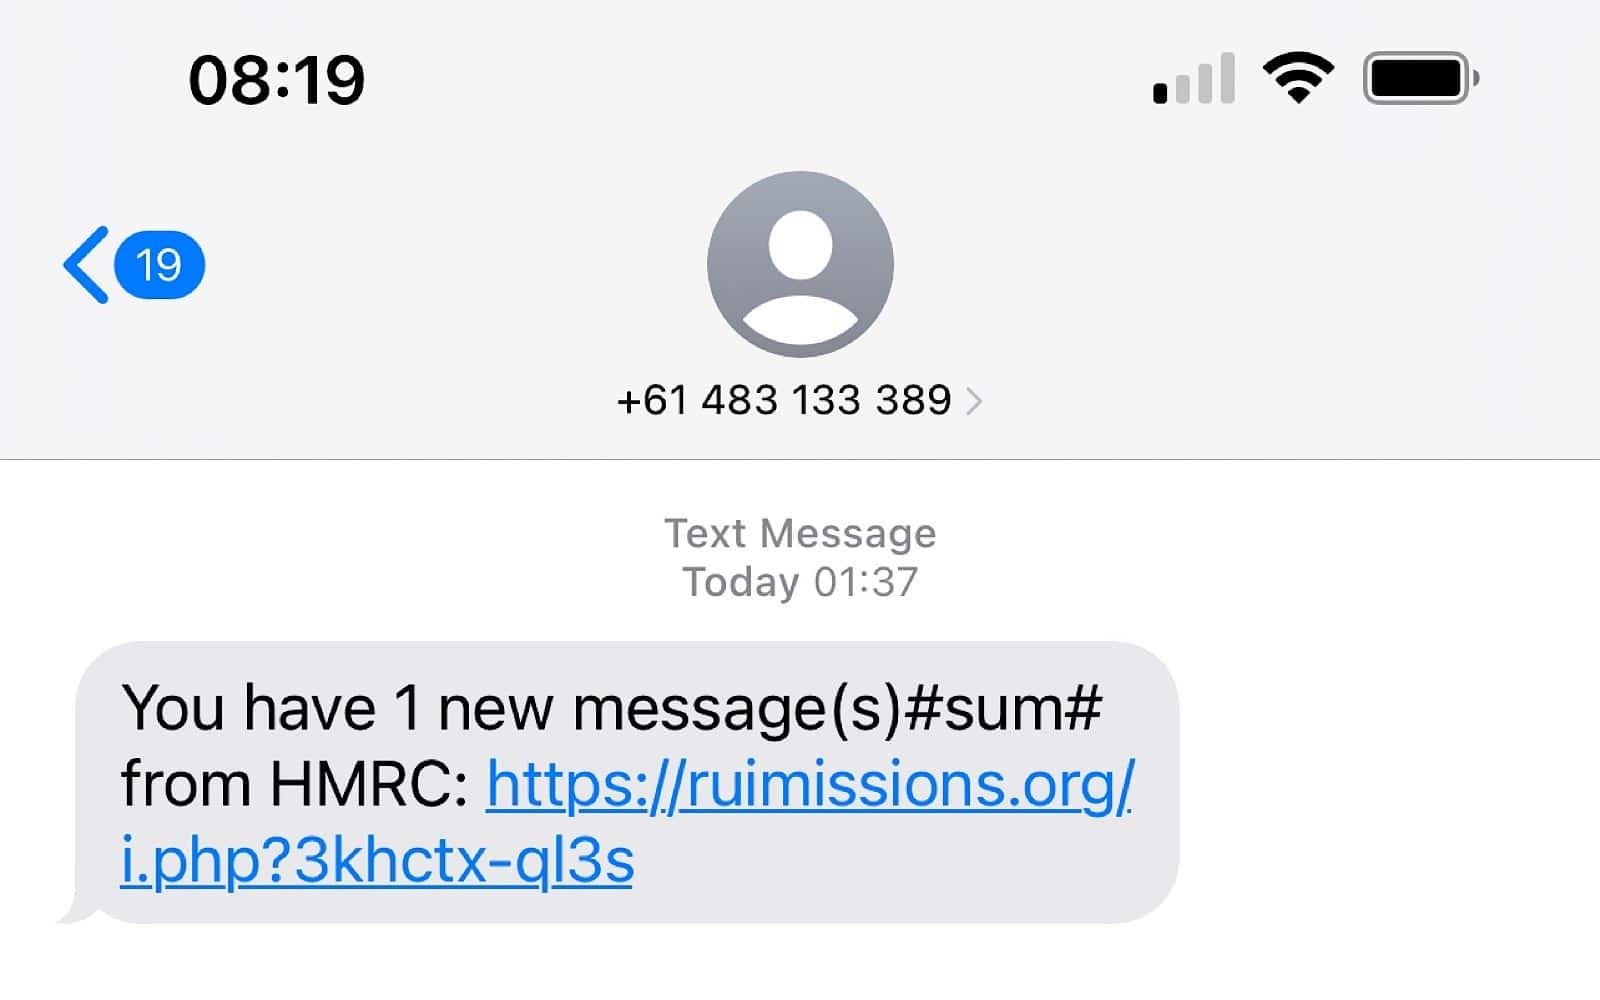 Yet another scam message. Just don't click.